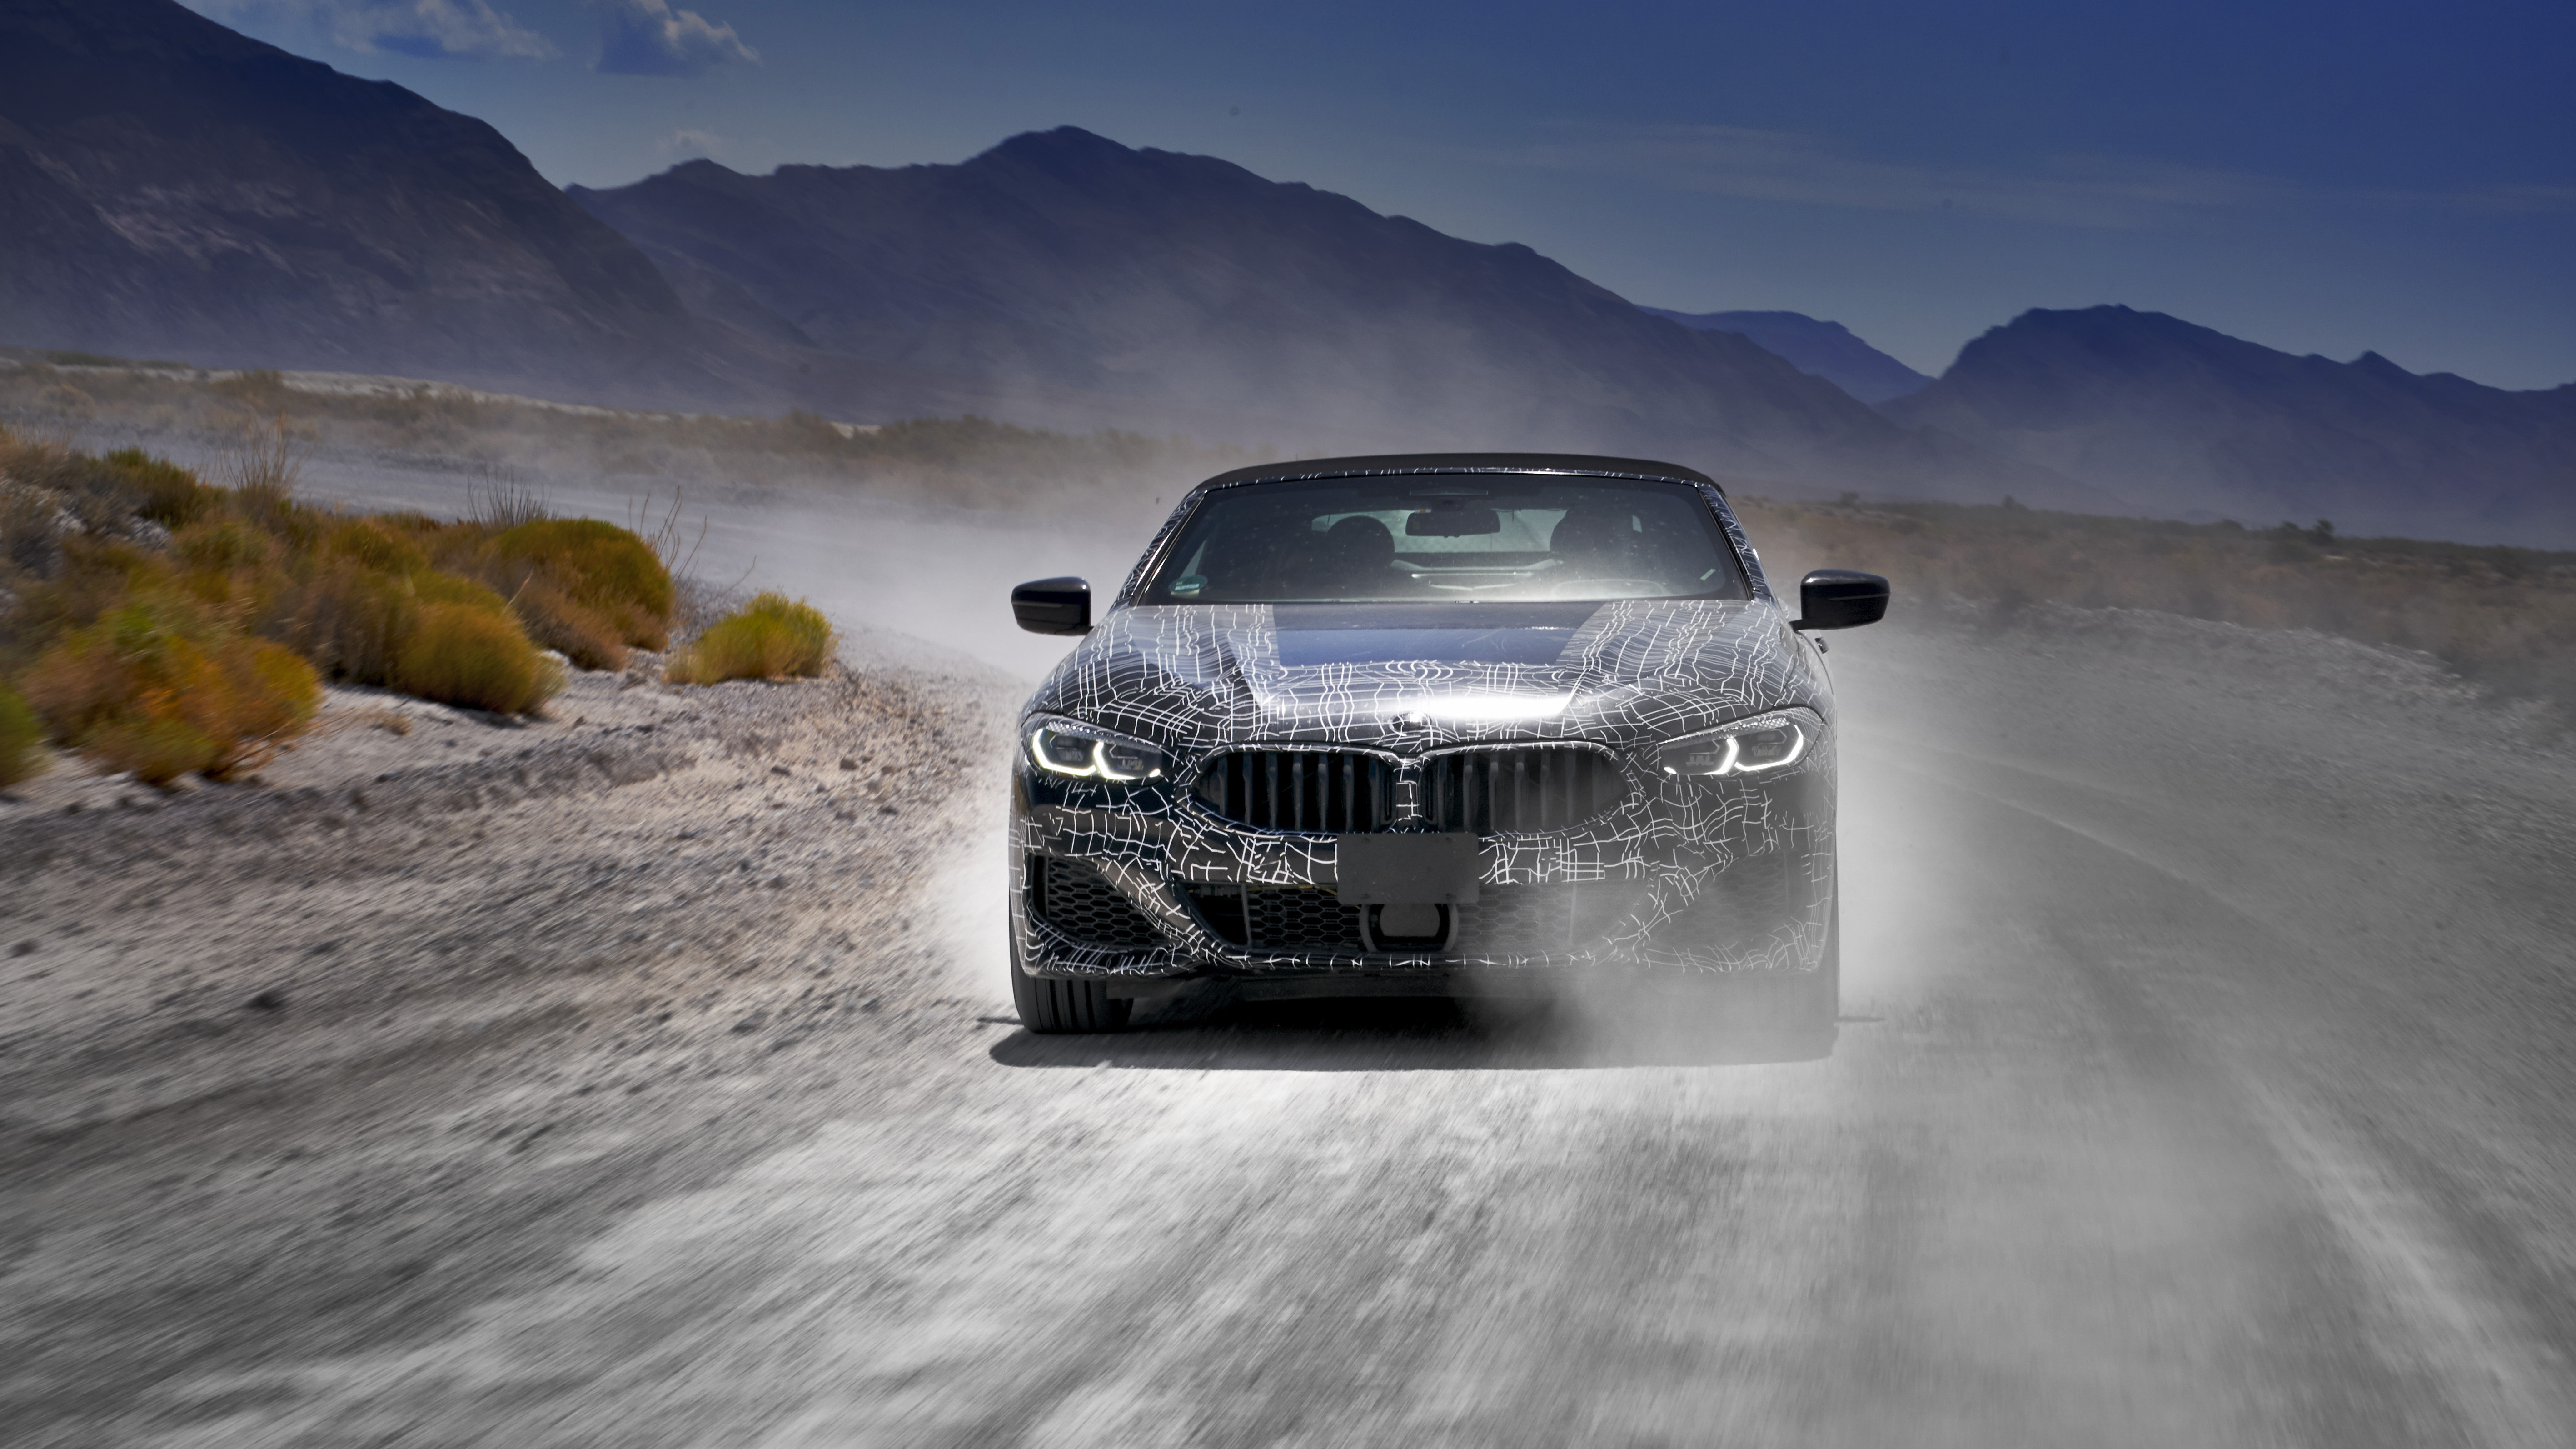 Bmw 8 Series Convertible Wallpapers